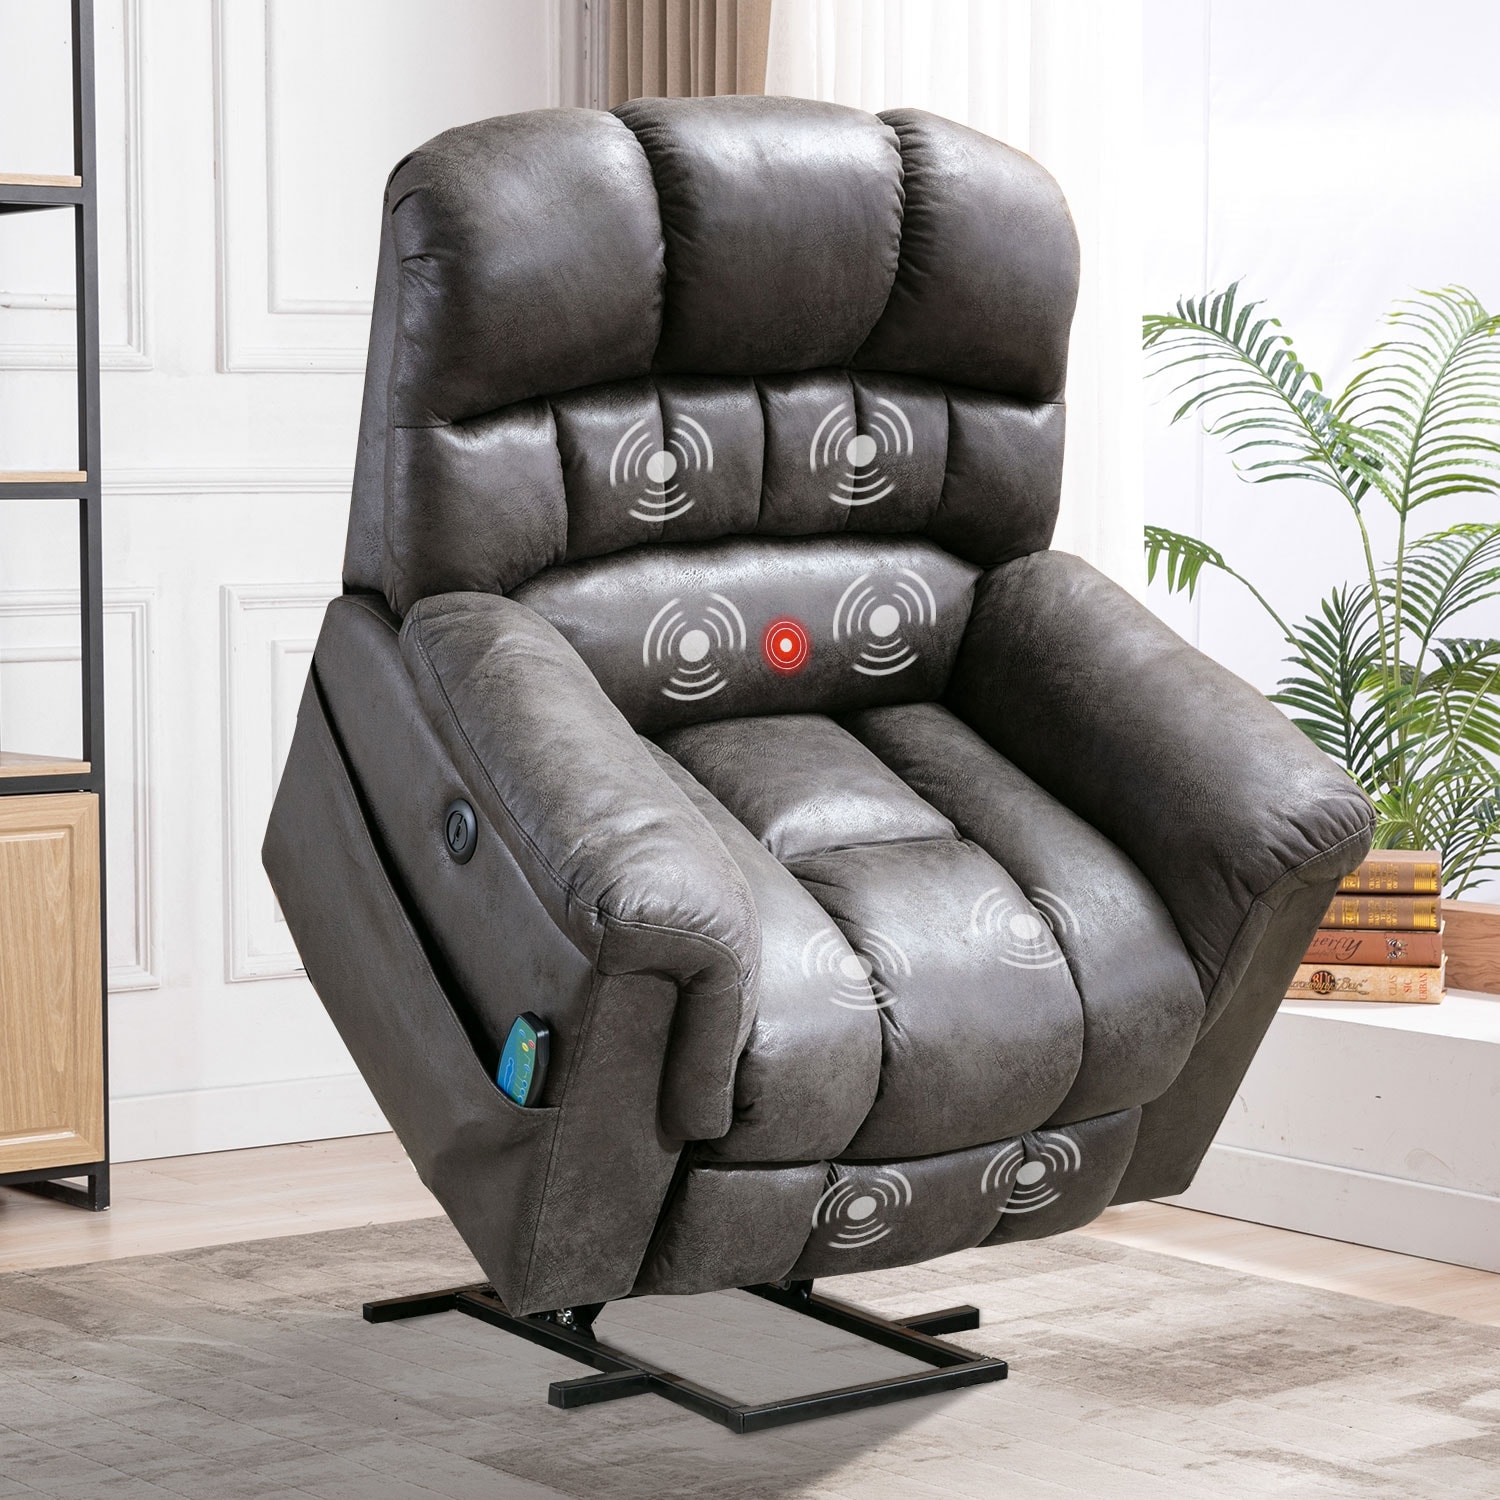 https://ak1.ostkcdn.com/images/products/is/images/direct/6425bb8d3b521154df8145c61bf73b6260473ea2/Super-Soft-Microsuede-Power-Lift-Recliner-Sofa-with-Massage-Chair.jpg